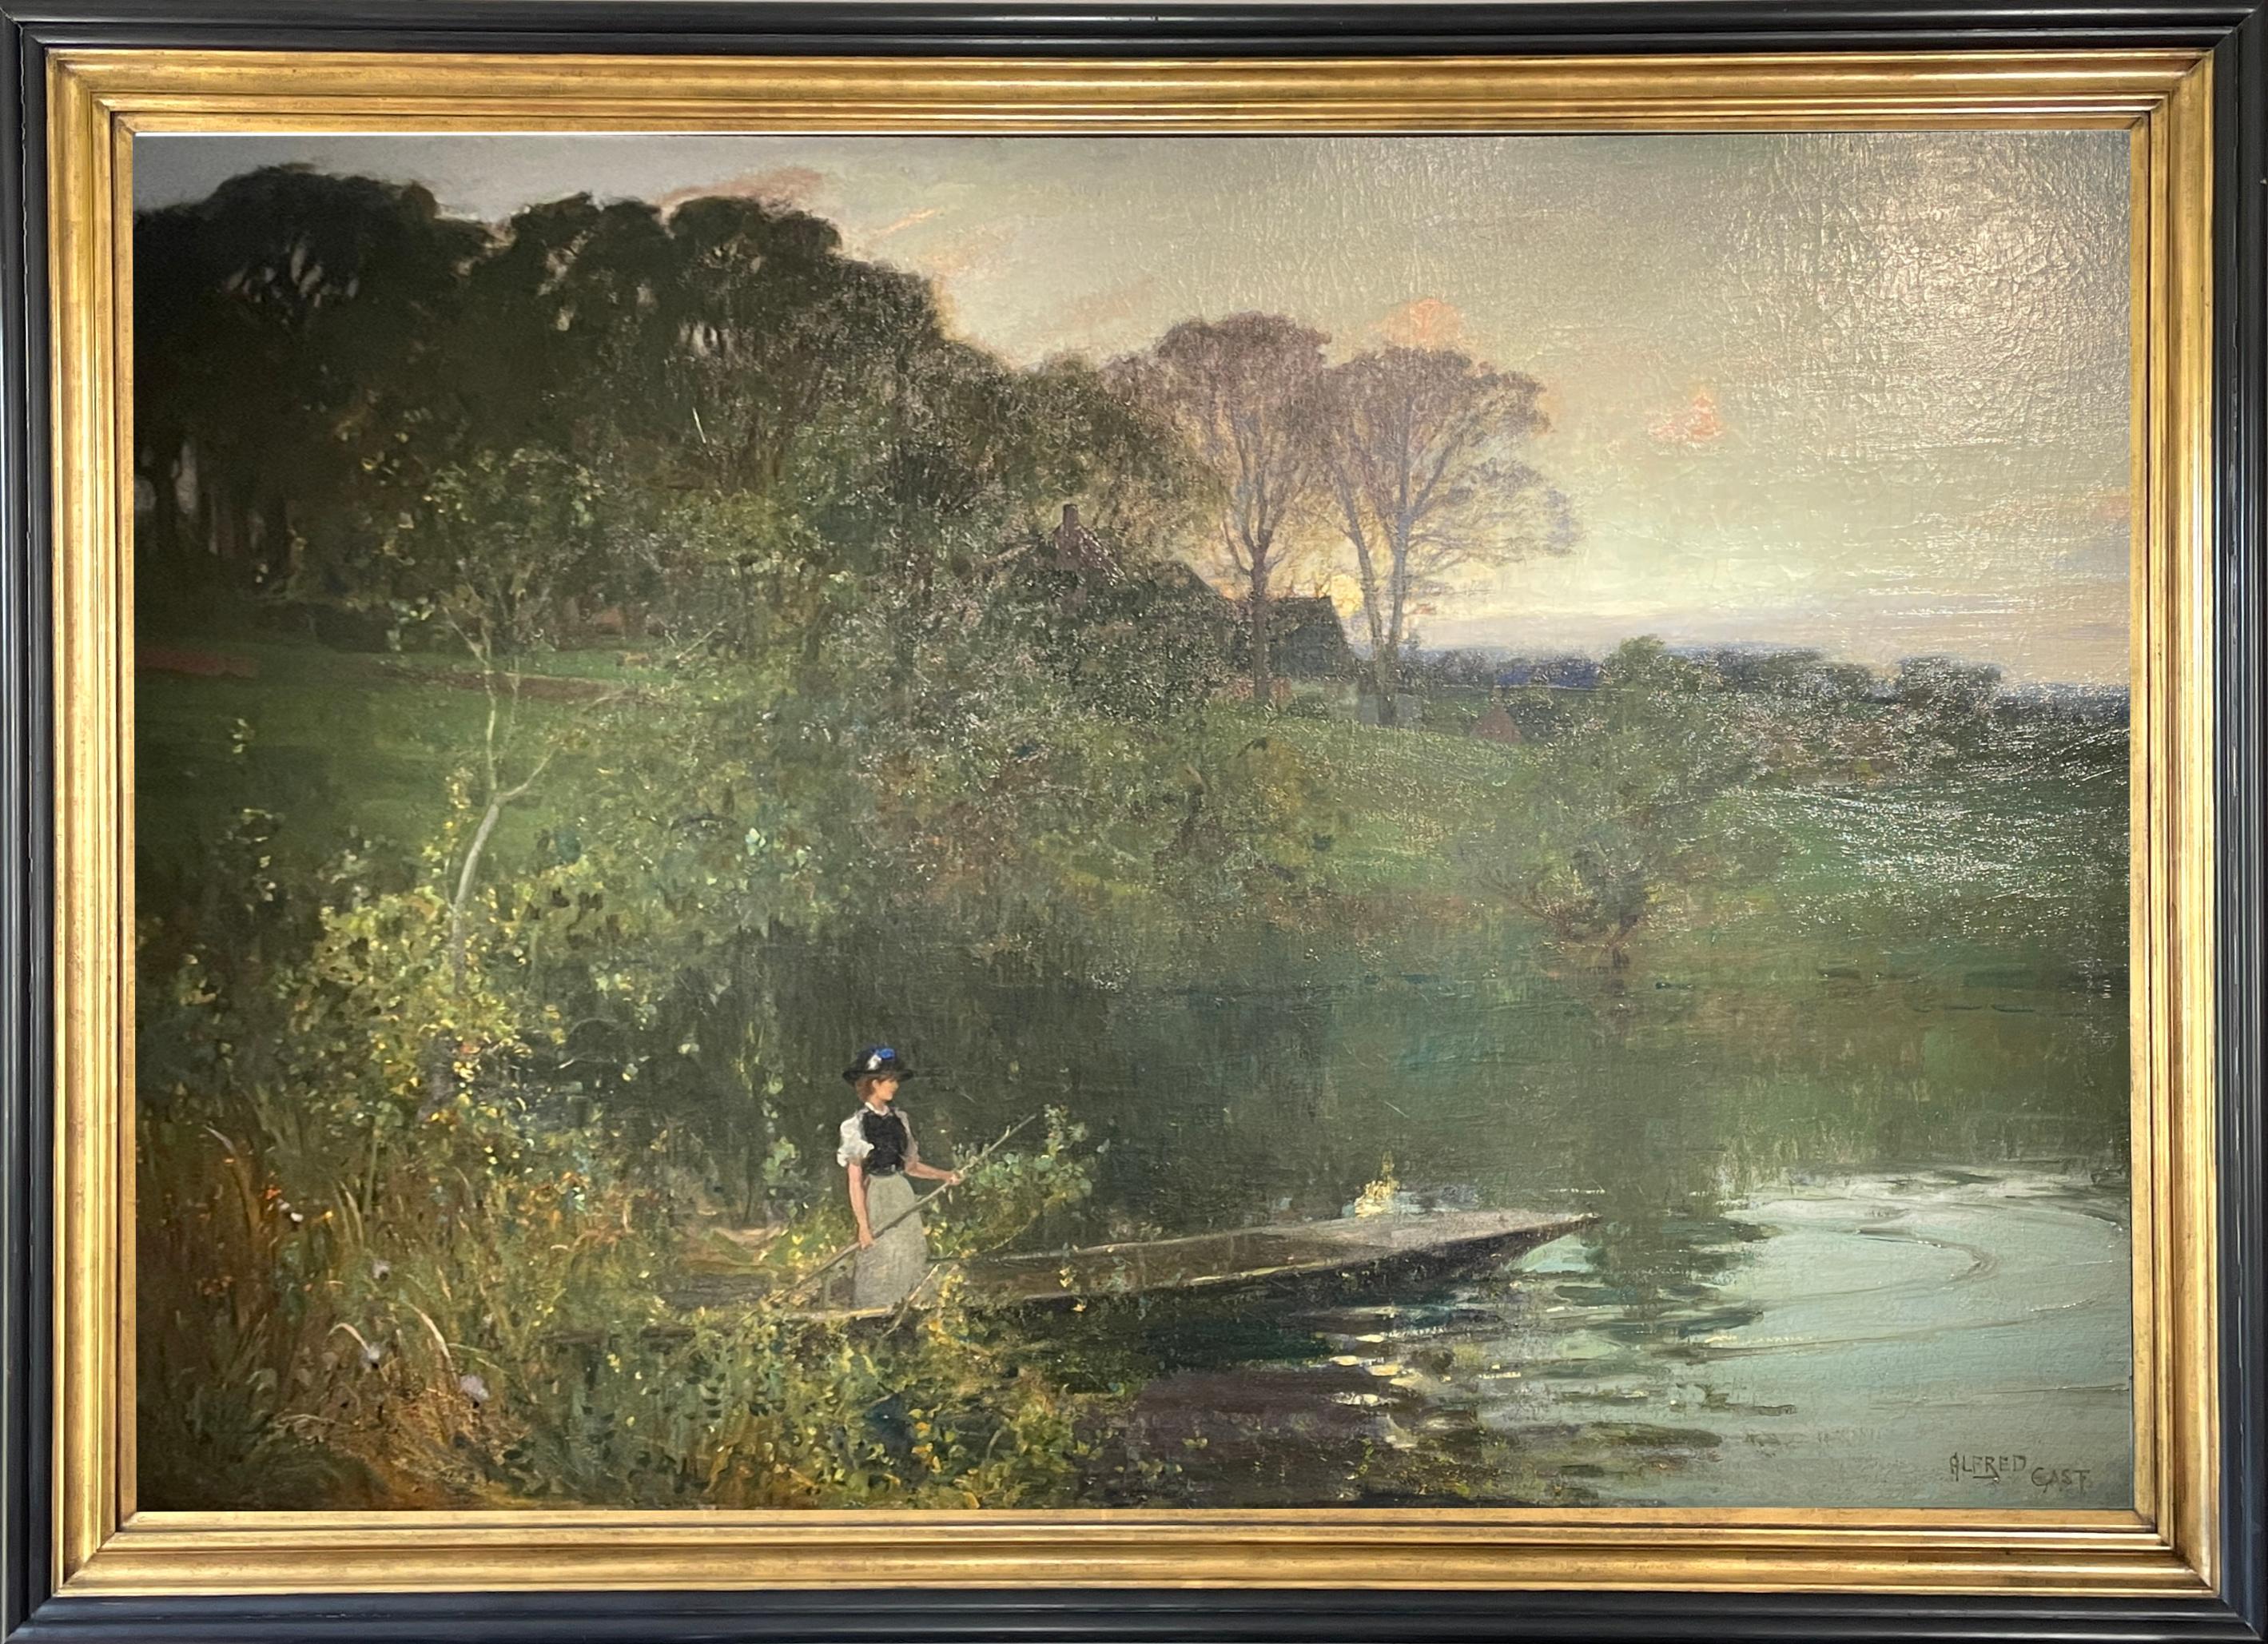 Very large oil on canvas 'Twilight on the River' by Sir Alfred East RA, RBA (1844 – 1913)
Signed by the artist.
59" x 82" overall in frame. (Main Photo taken with spotlight)

East was born in Kettering in Northamptonshire and studied at the Glasgow